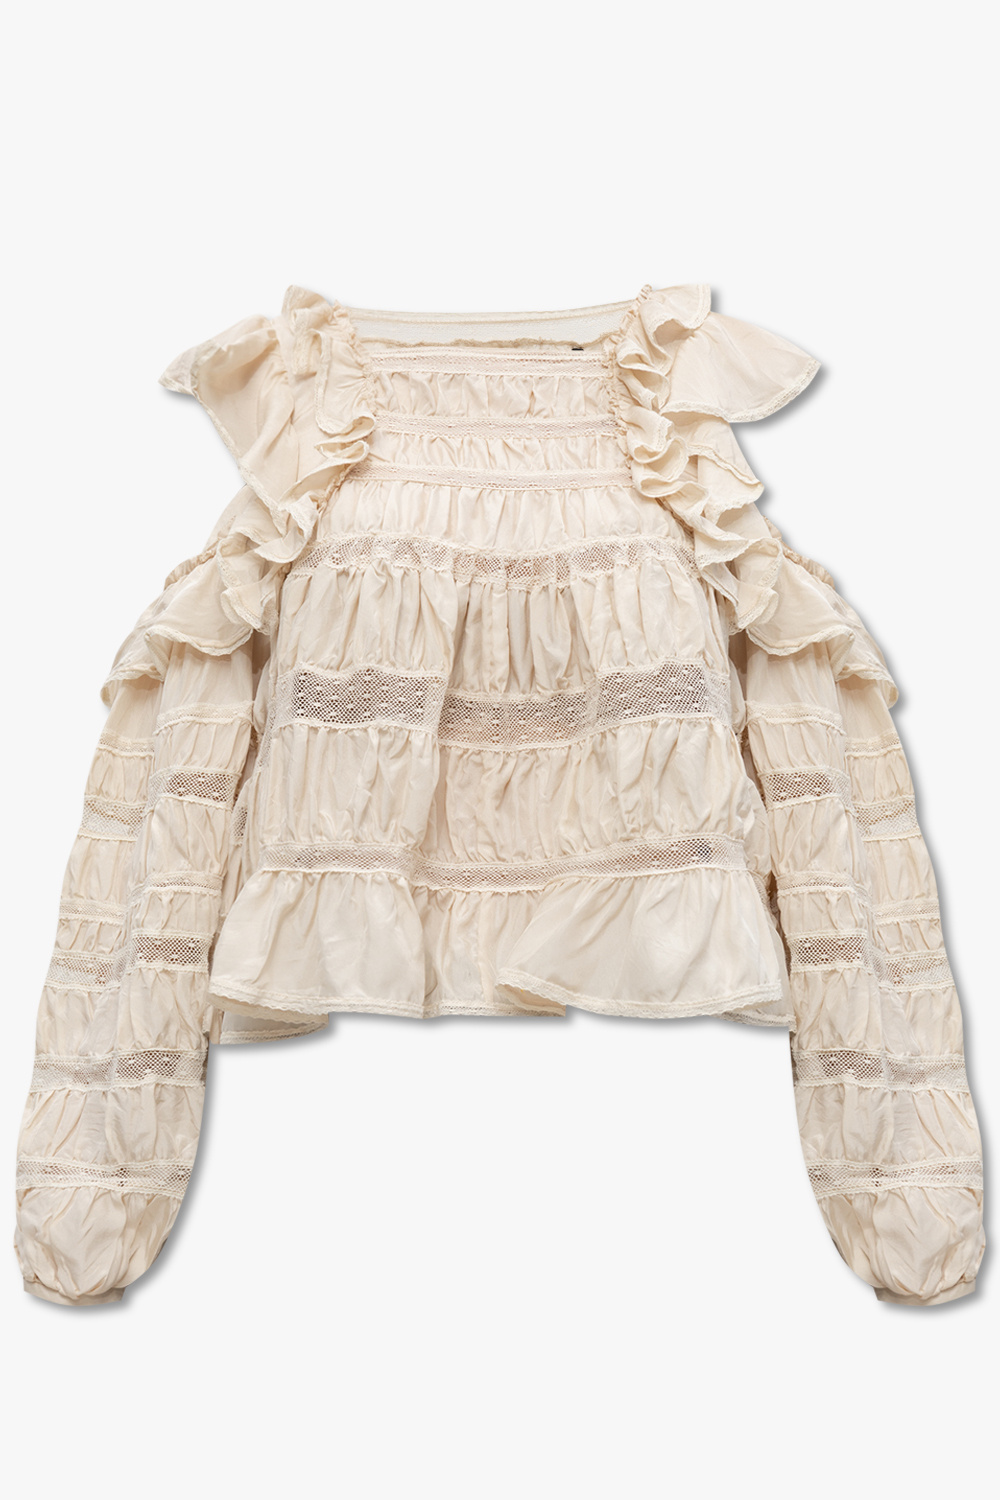 Isabel Marant ‘Cerobas’ top with ruffles